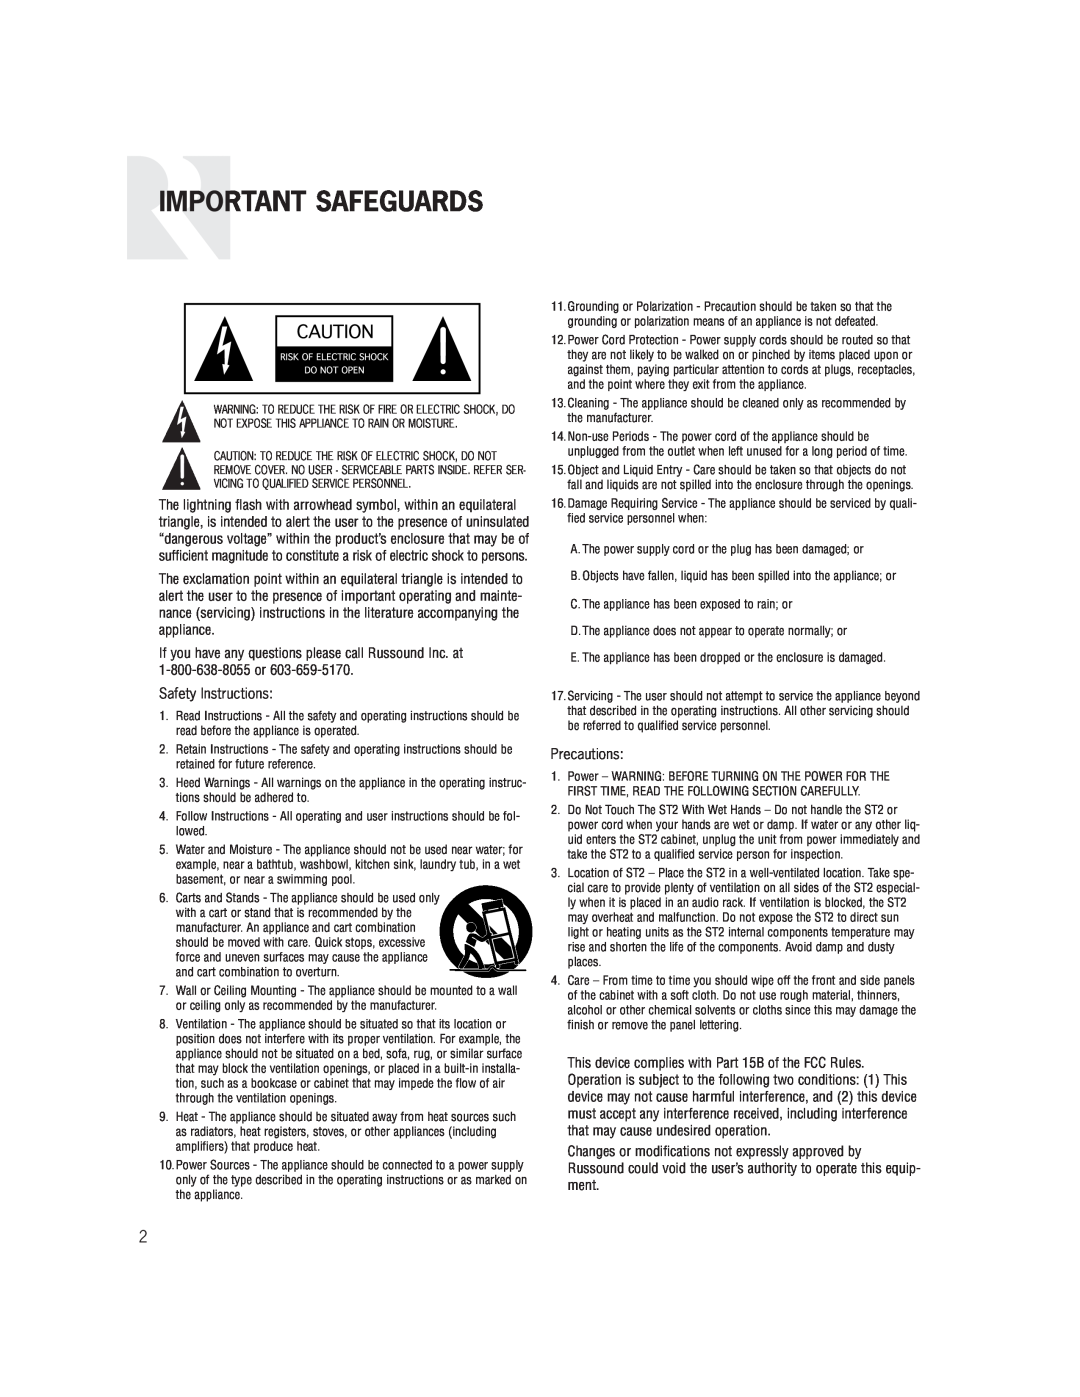 Russound ST2S installation manual Important Safeguards, Safety Instructions, Precautions 